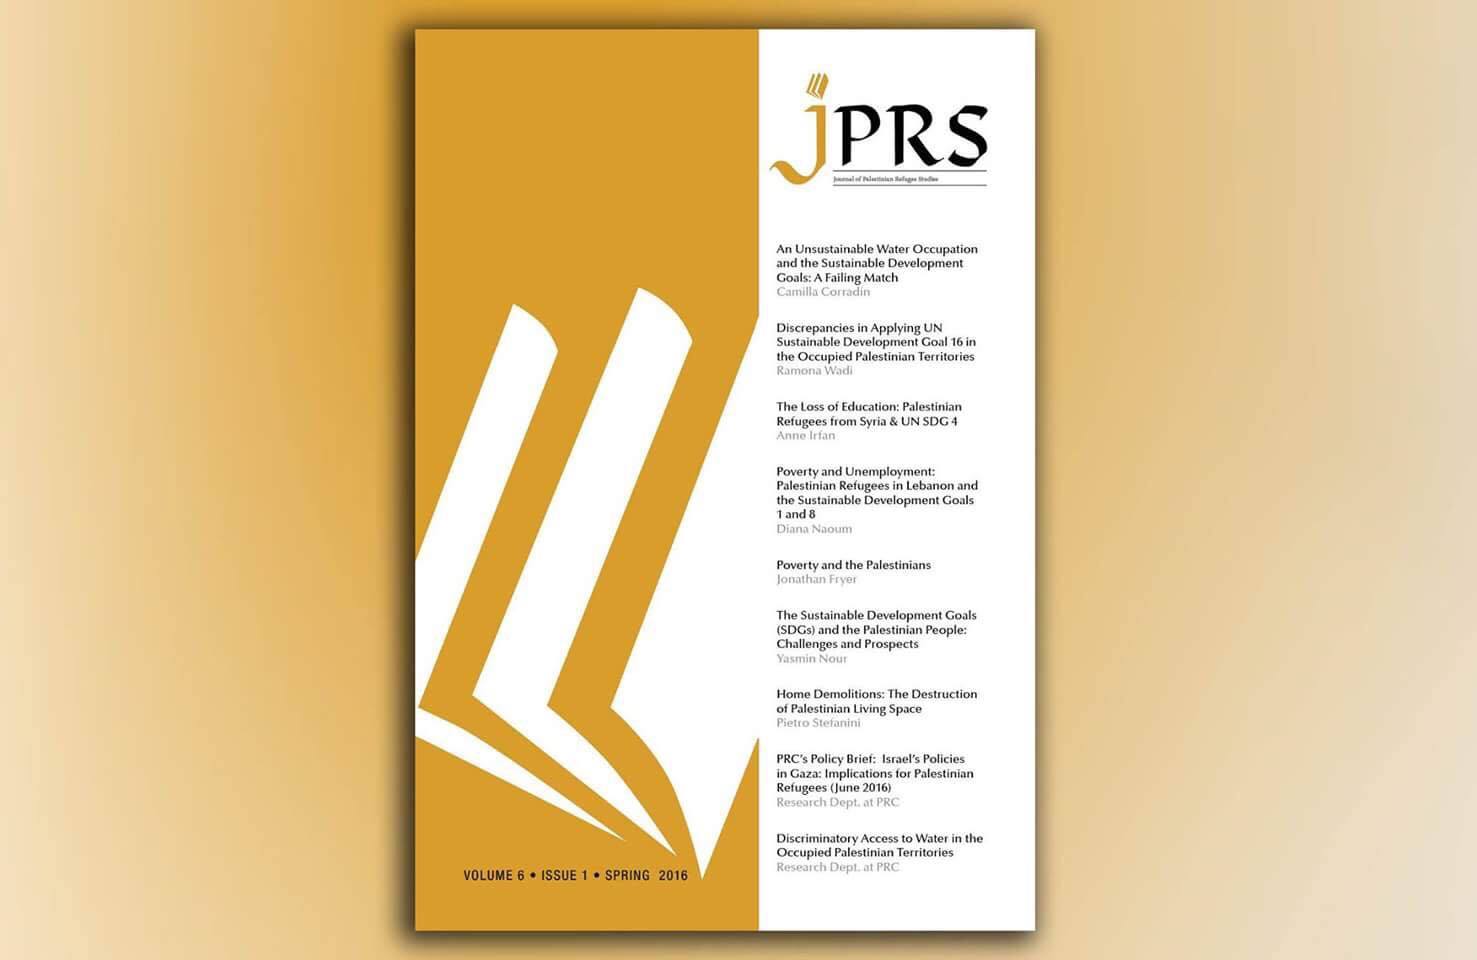 PRC issues Volume 6 of The Journal of Palestinian Refugee Studies (JPRS)